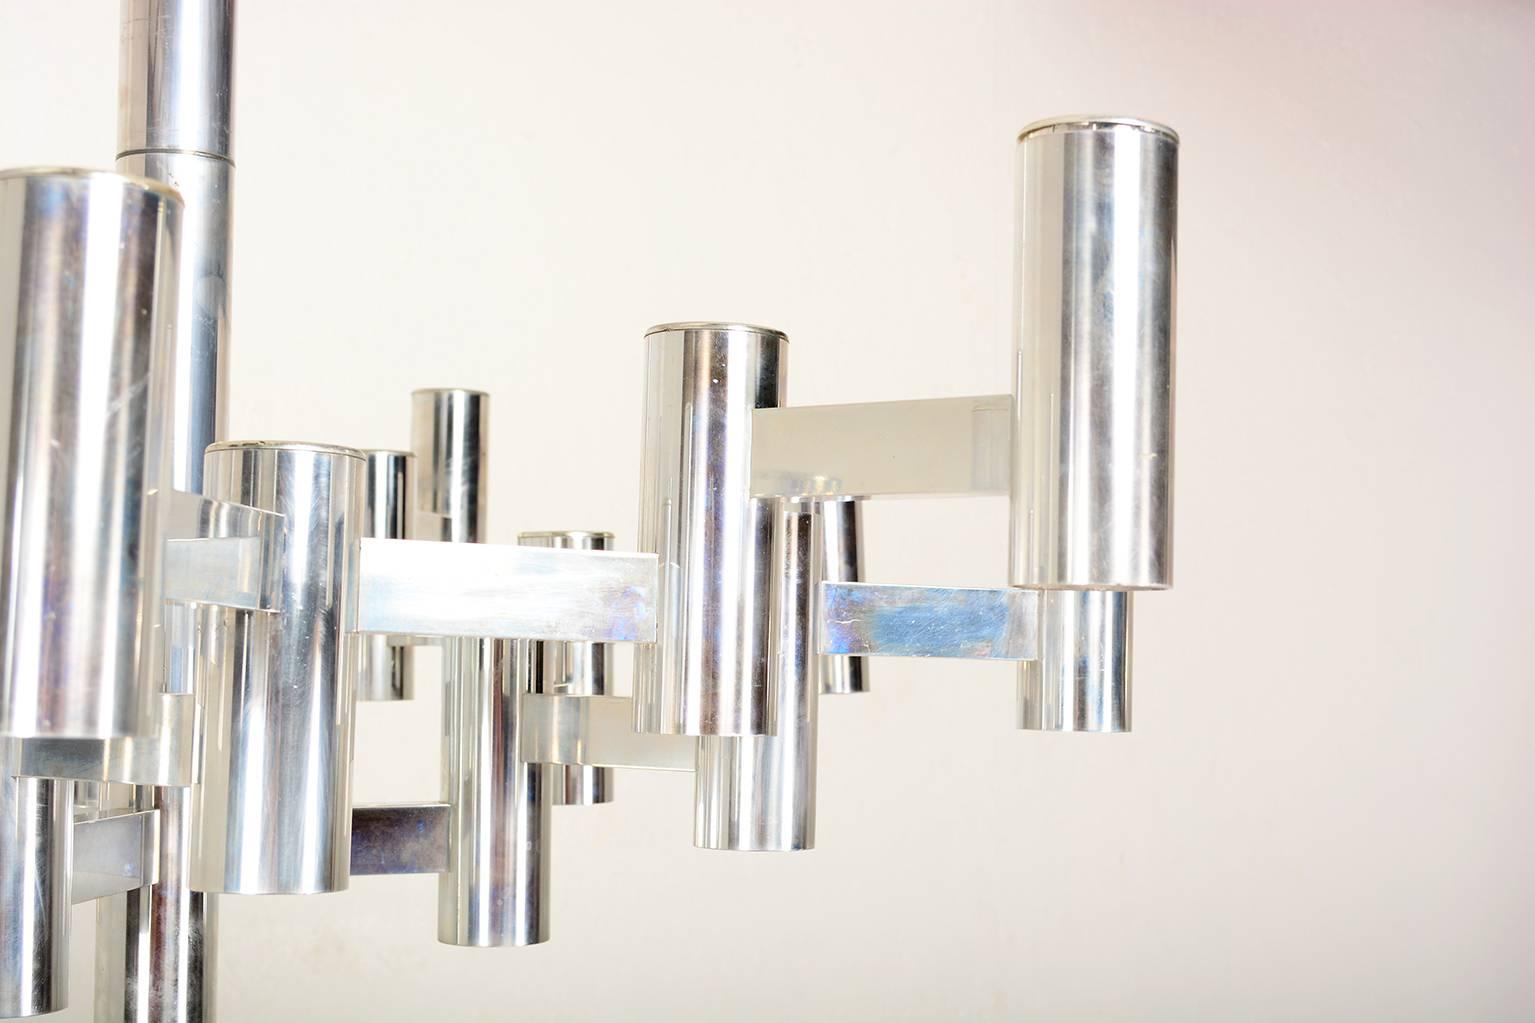 For your consideration Vintage Sciolari Chandelier in Aluminum. 
Large futuristic modern cubic chandelier in aluminum by Gaetano Sciolari.
Made in Italy, circa 1960s
Impressive chandelier with 22-lights in a geometric configuration.
Dimensions: